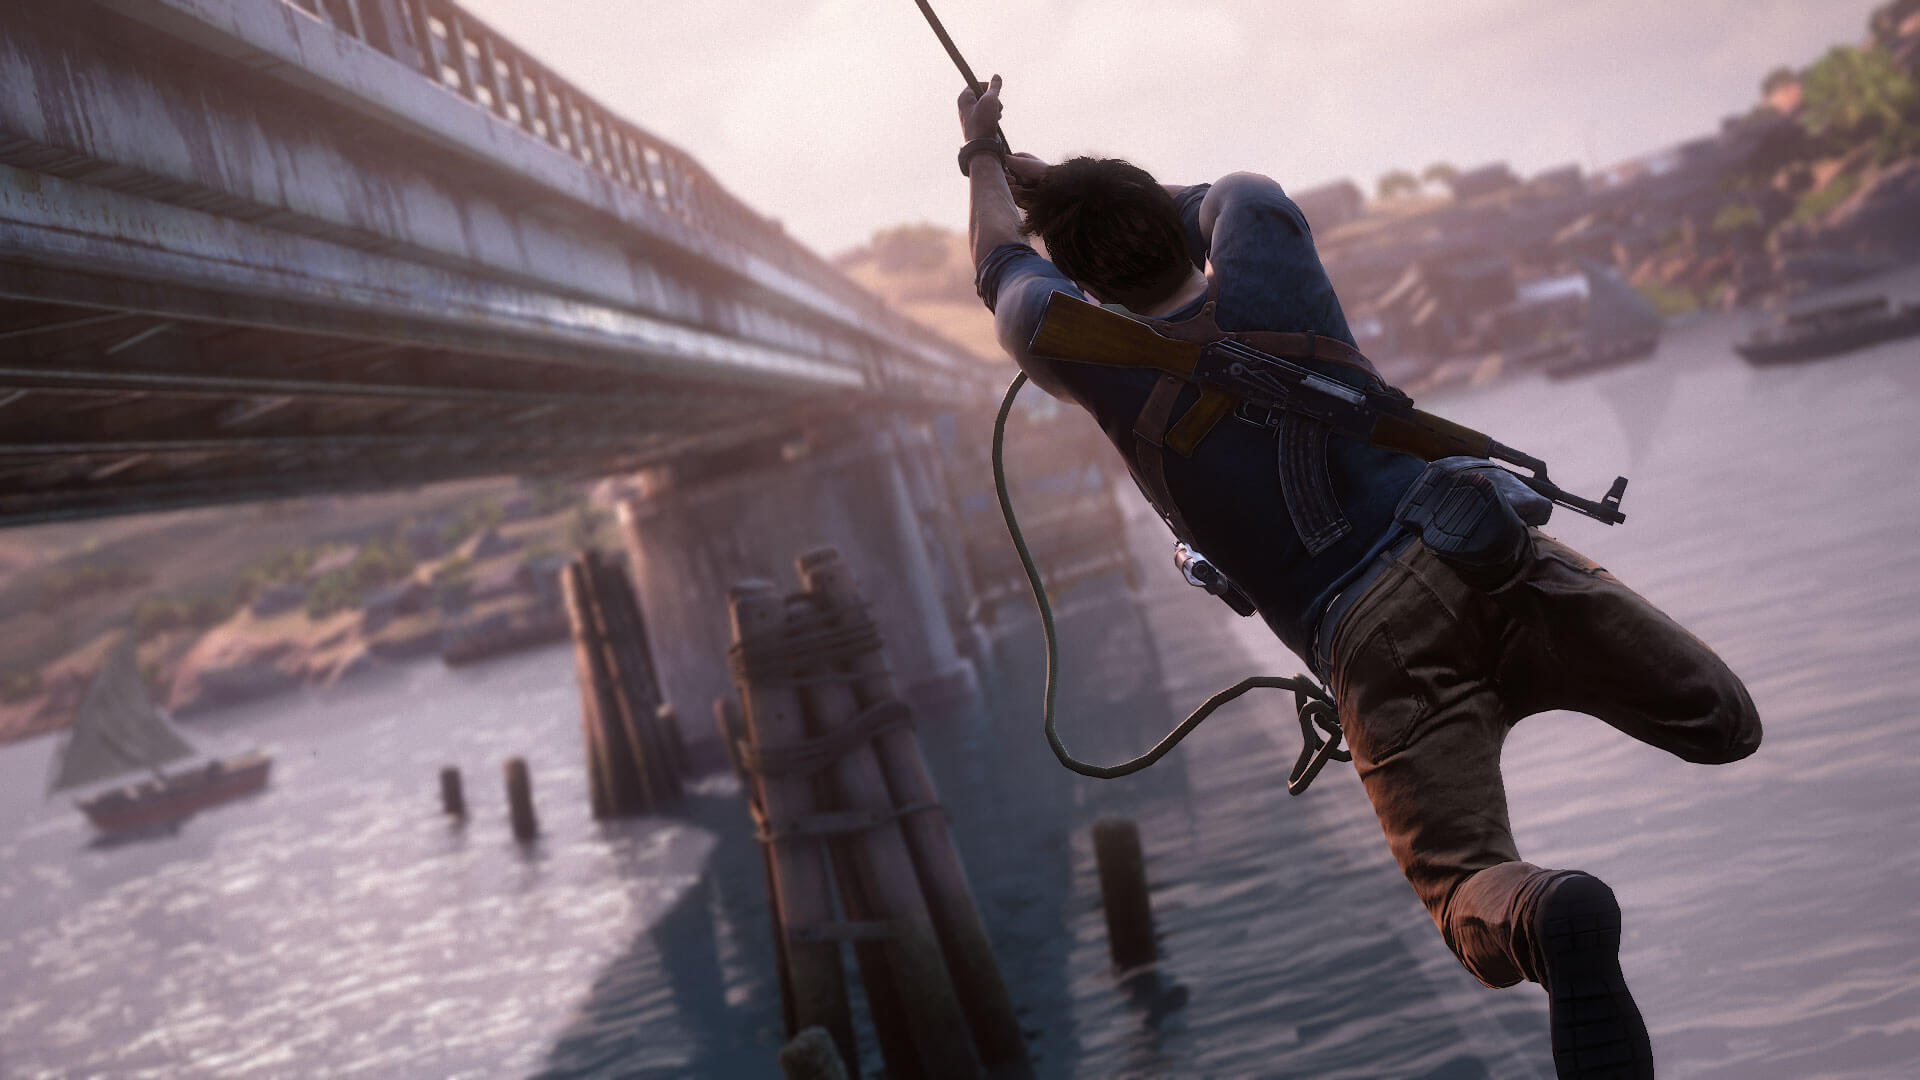 Media asset in full size related to 3dfxzone.it news item entitled as follows: Sony pubblica un gameplay trailer di 15 minuti su Uncharted 4: A Thief's End | Image Name: news24088_Uncharted-4-Screenshot_8.jpg